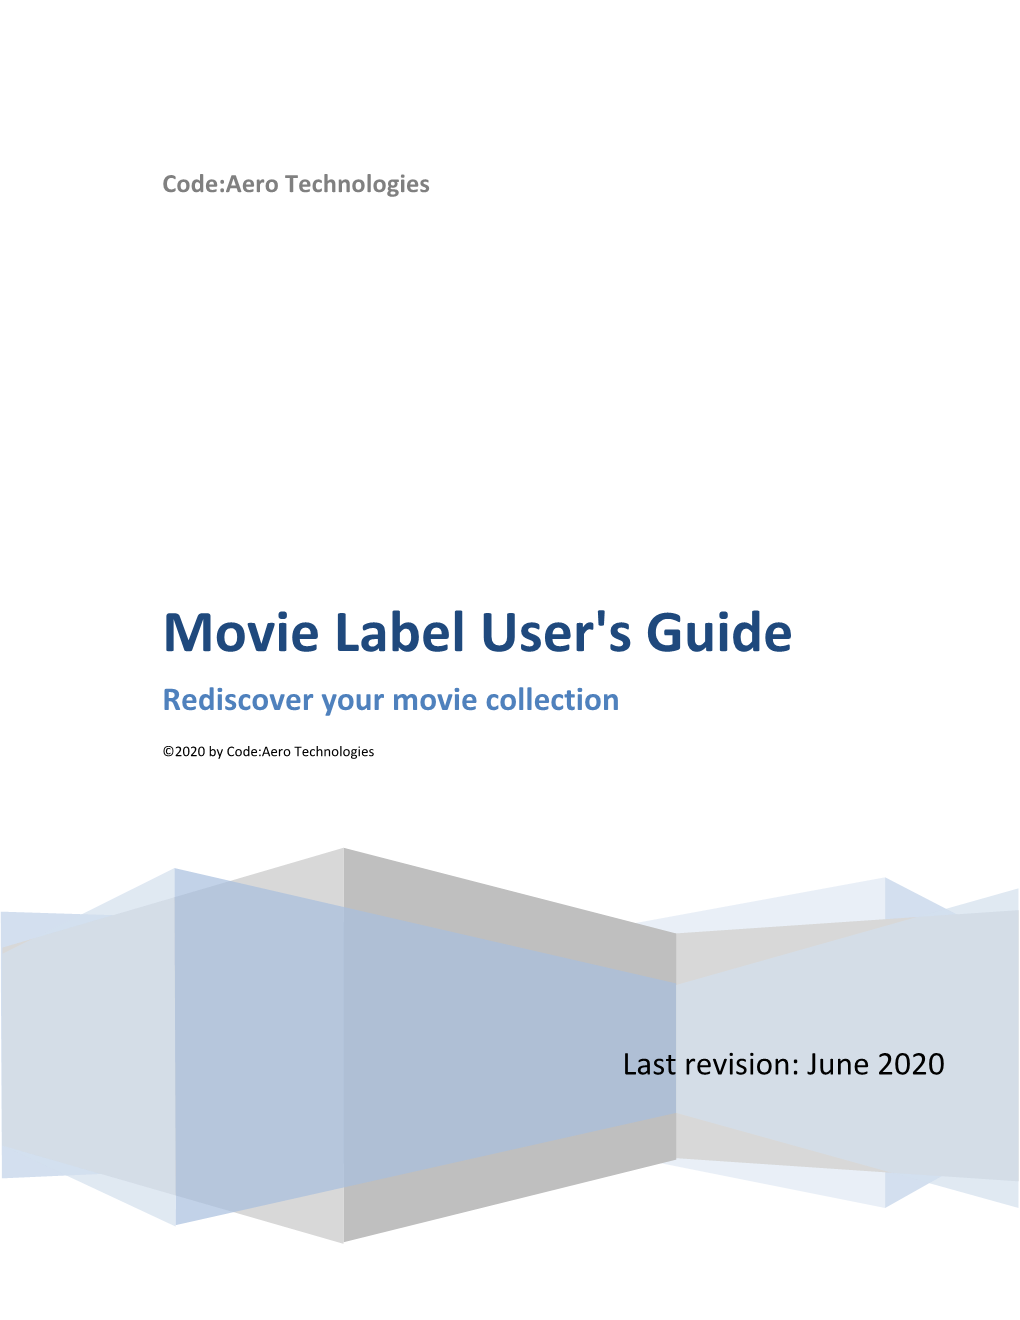 Movie Label User's Guide Rediscover Your Movie Collection